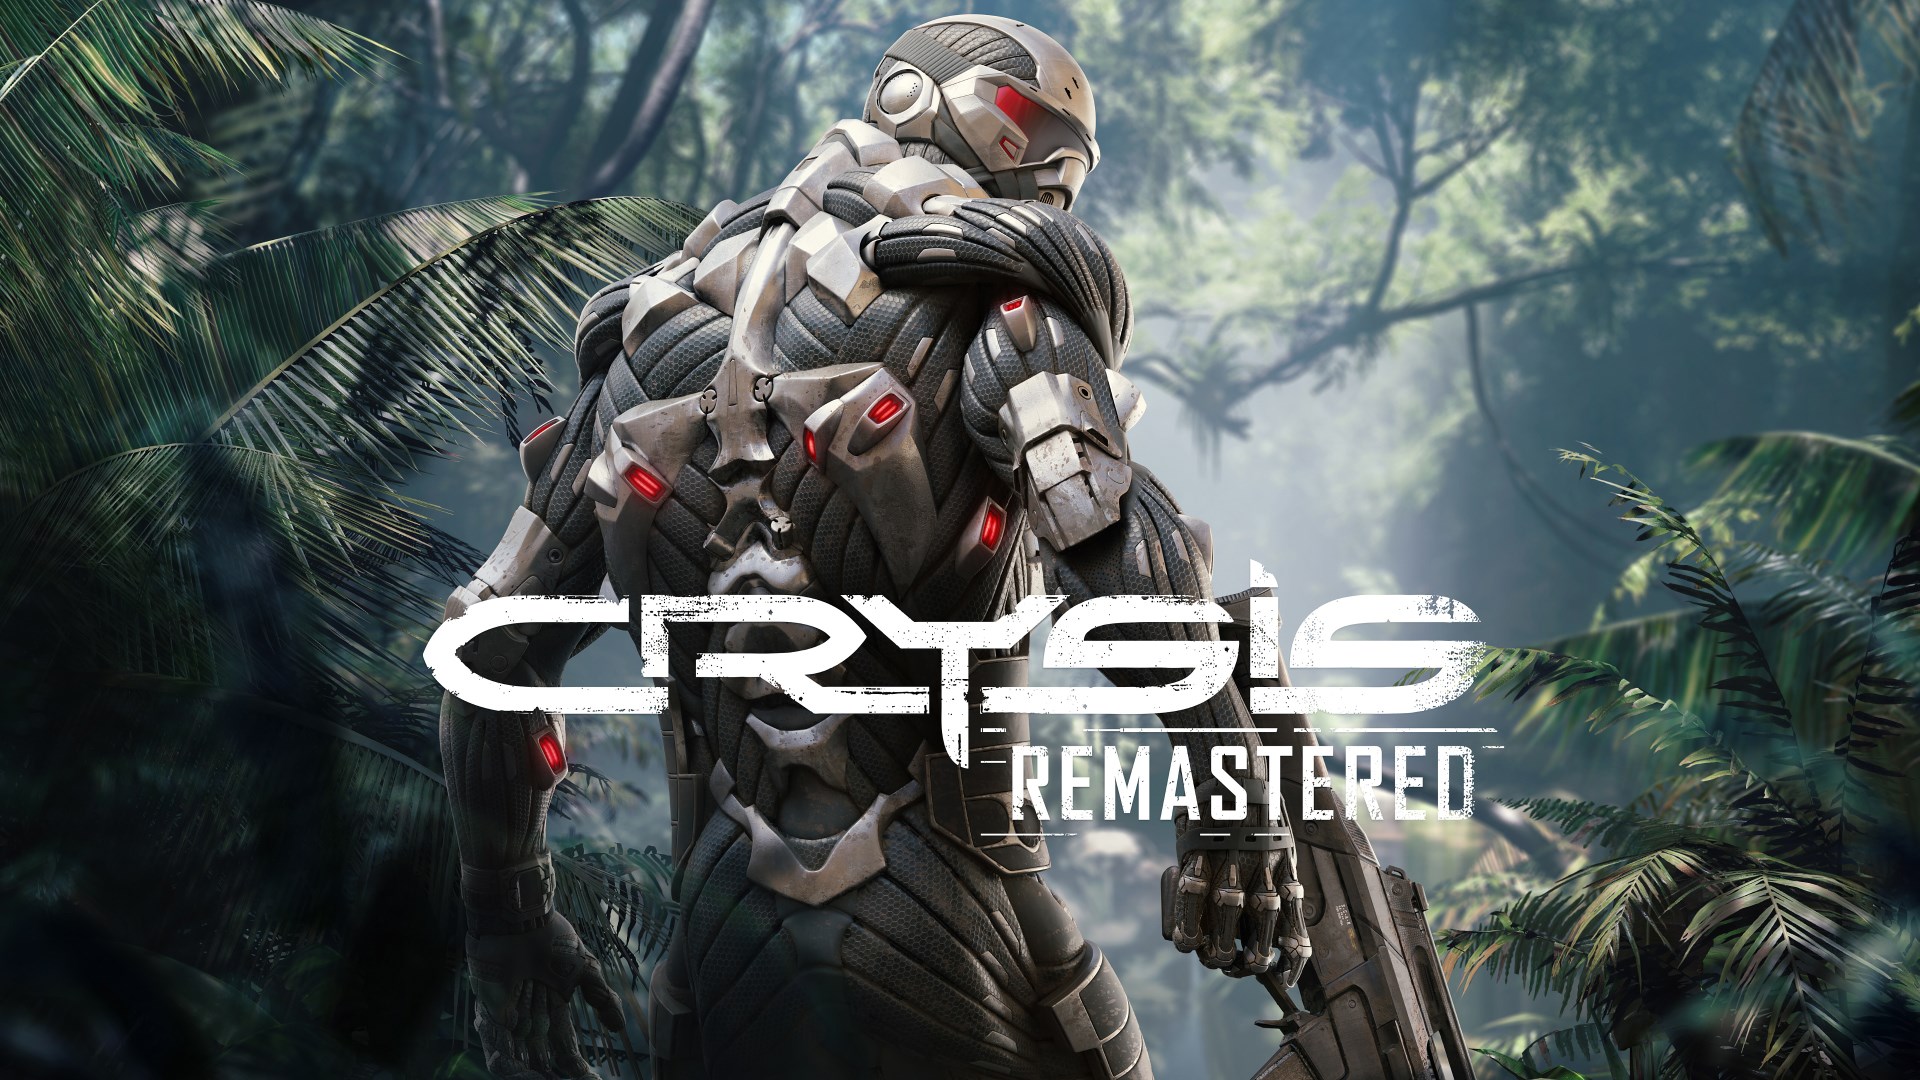 Video For Crysis Remastered Is Now Available For Xbox One